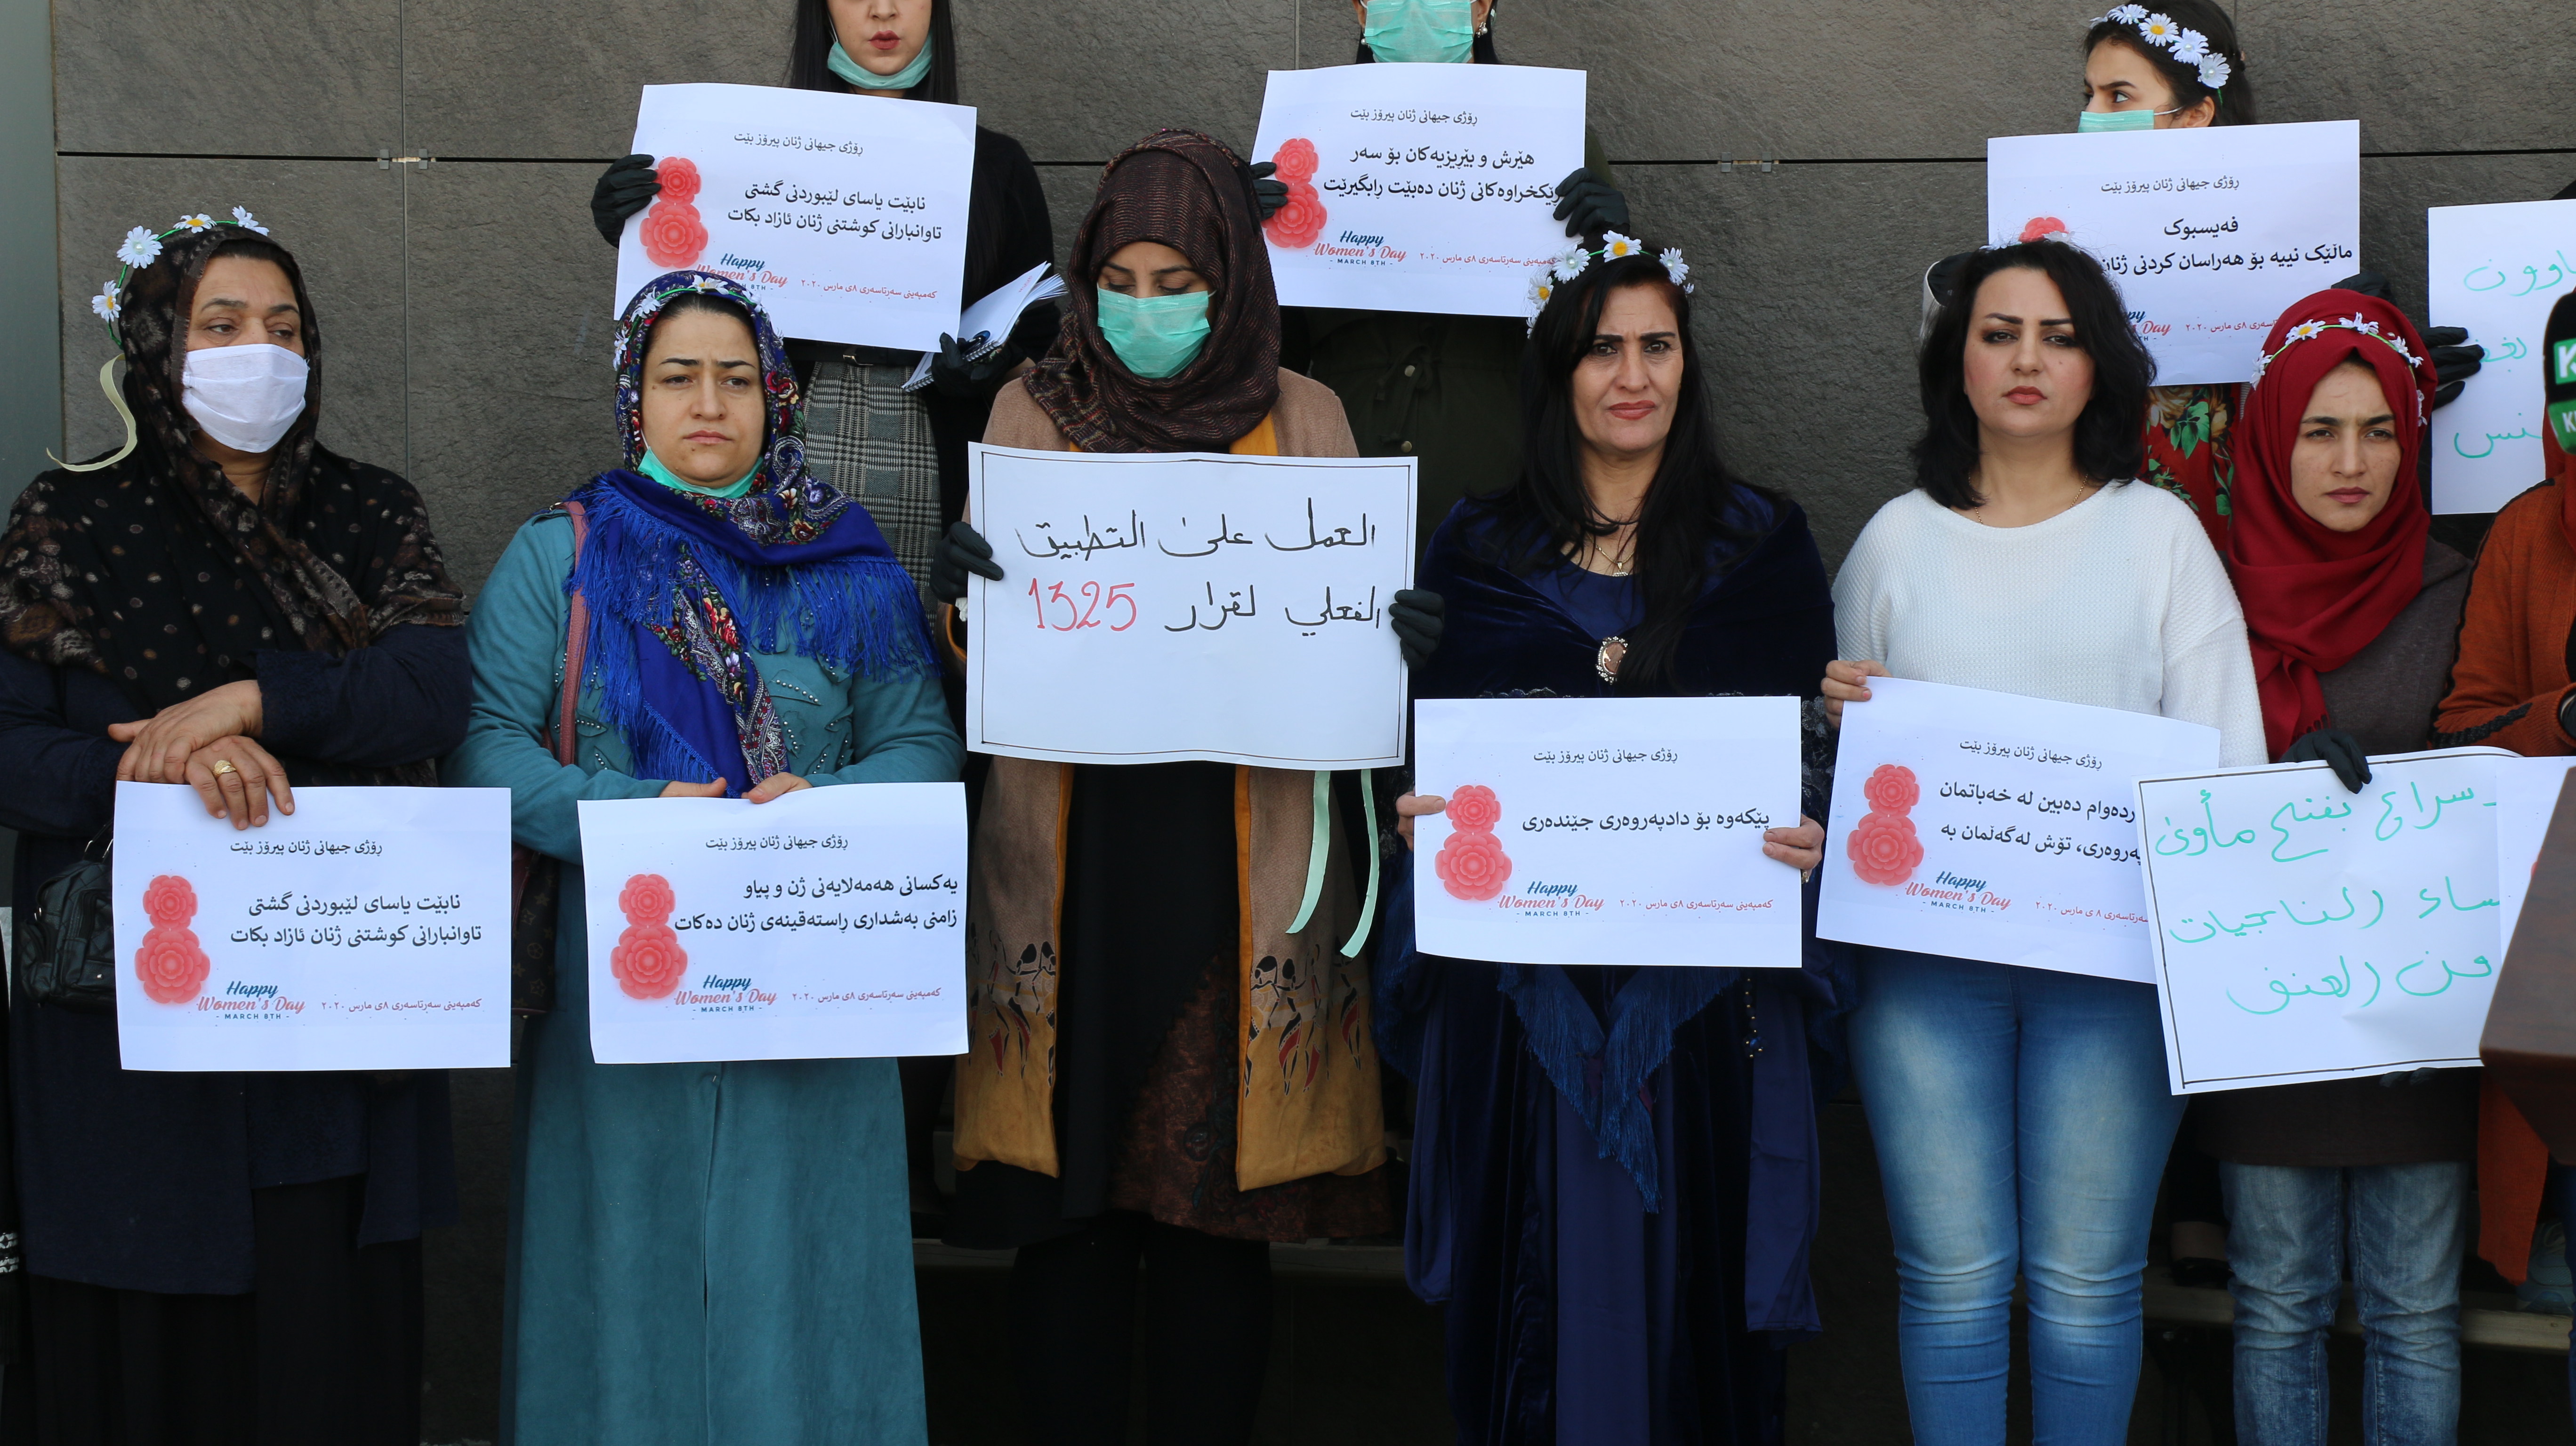 Kirkuk 2020 - Women demand the end of violence against them - Picture by KirkukNow